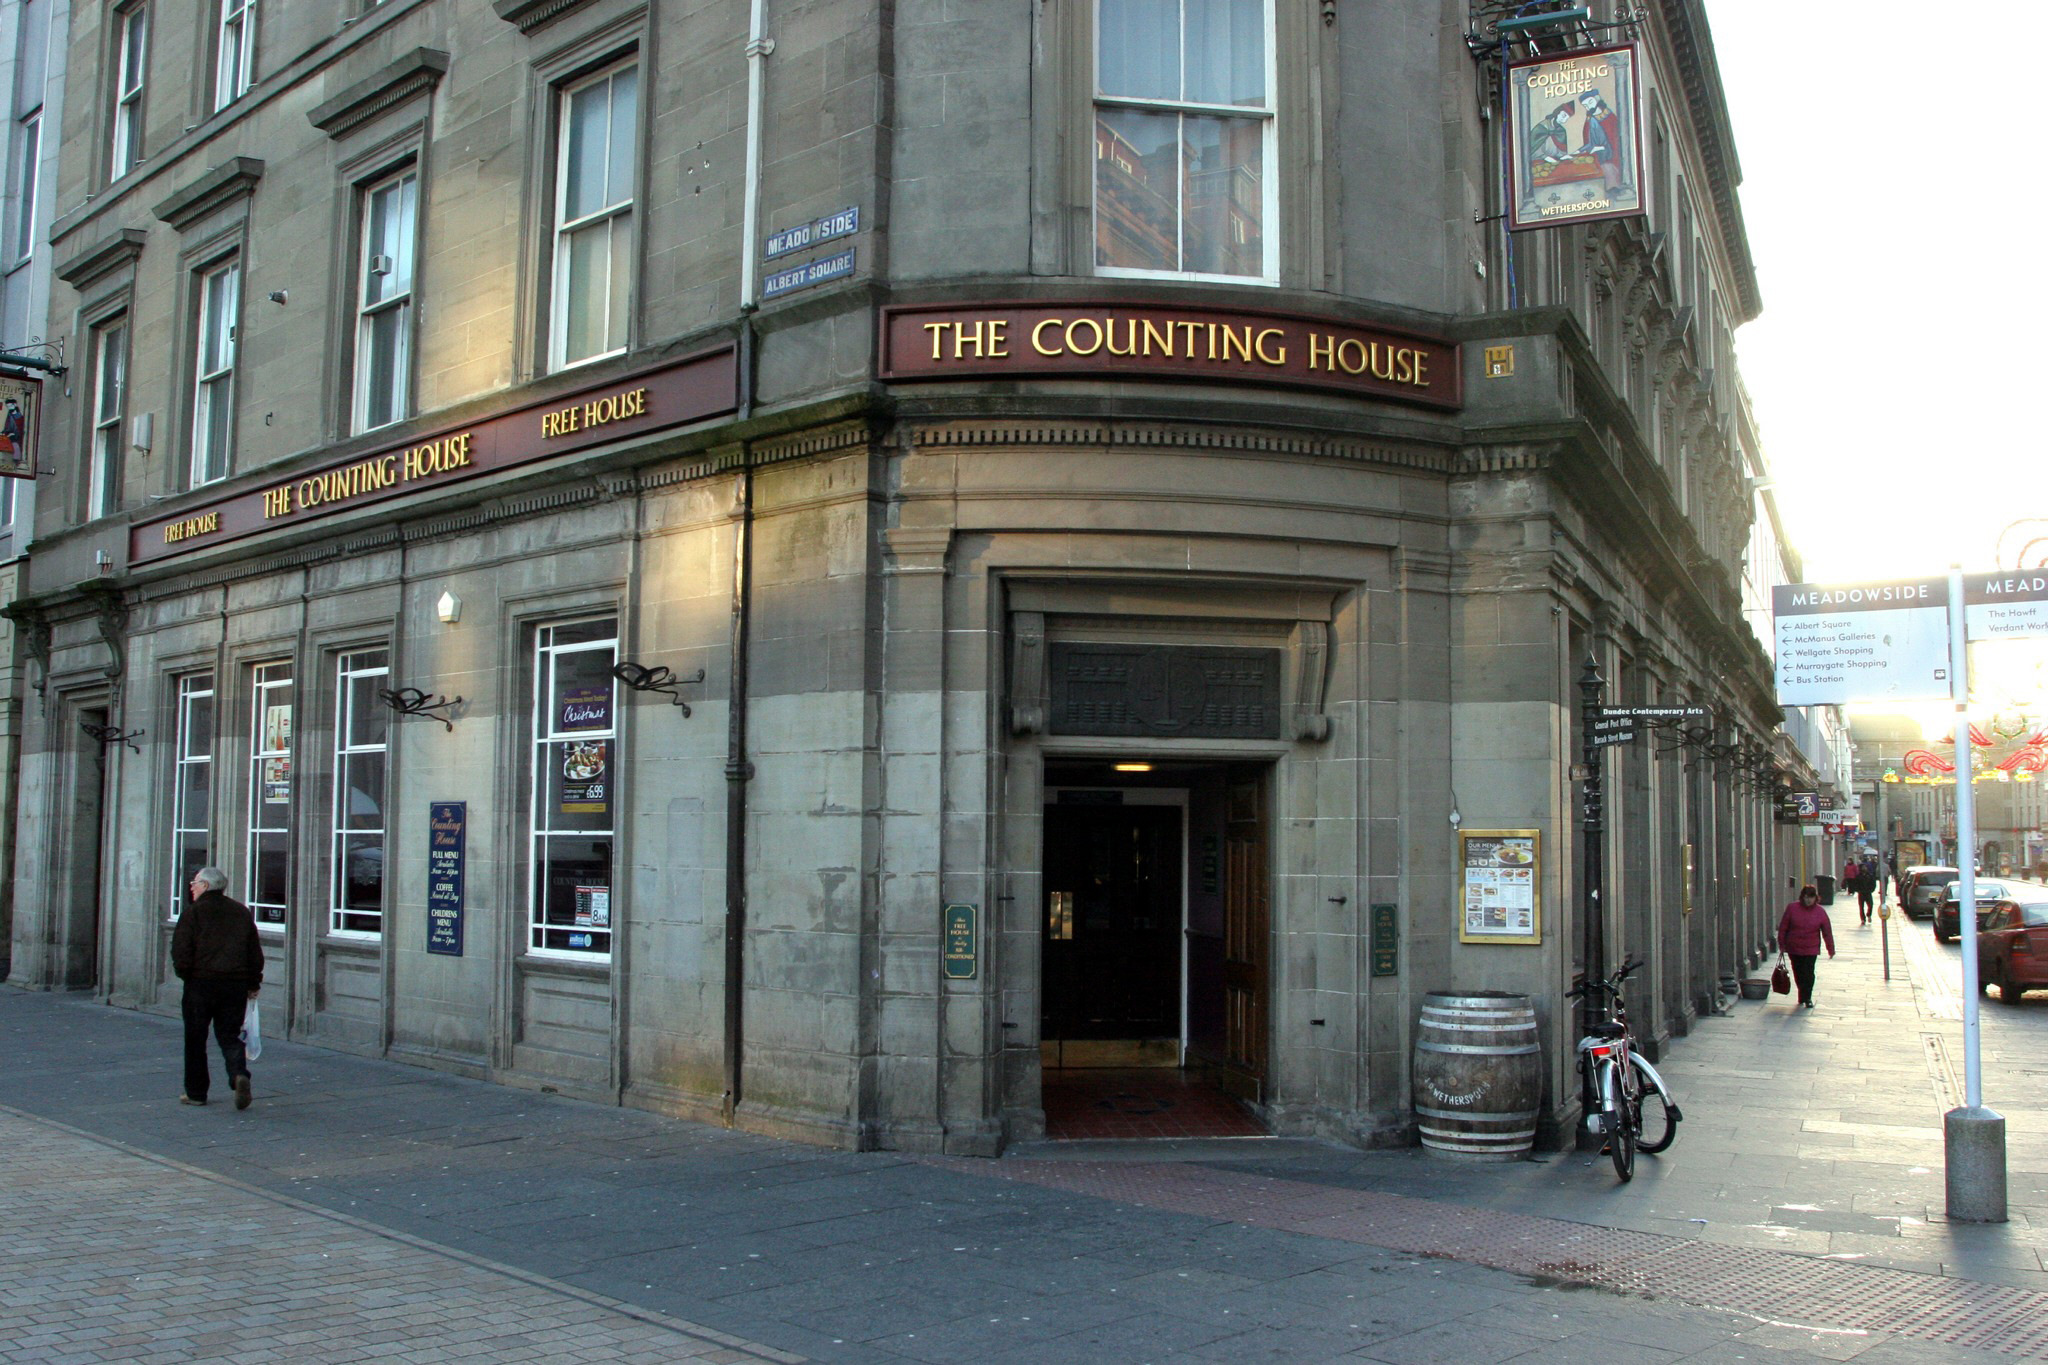 The Counting House.